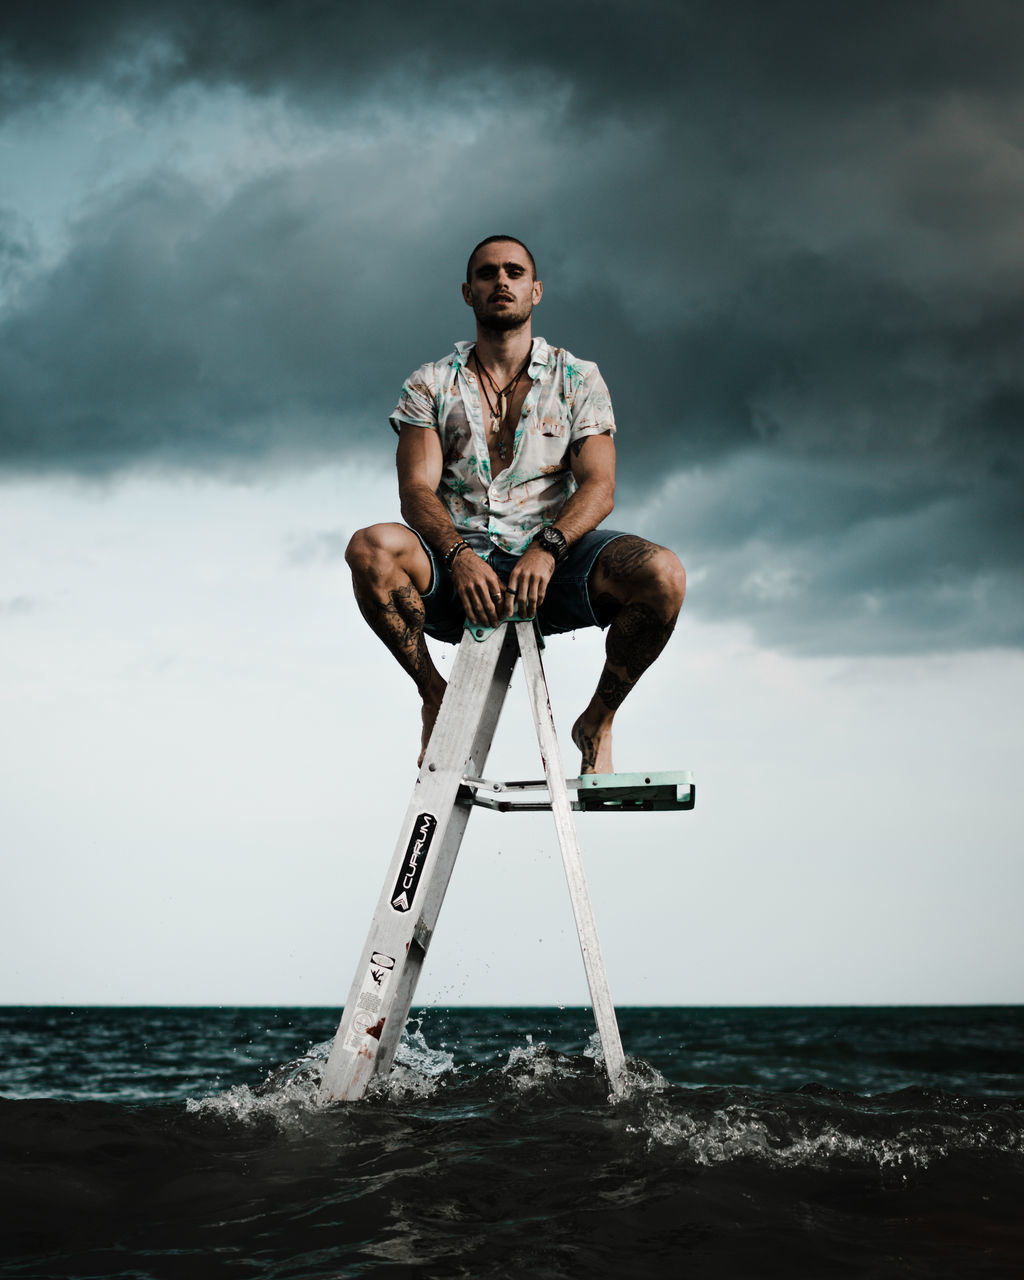 adult, cloud, one person, sky, water, full length, sea, men, nature, sitting, sports, young adult, overcast, copy space, storm, ocean, person, land, ladder, strength, outdoors, storm cloud, horizon over water, horizon, blue, holding, motion, surfing